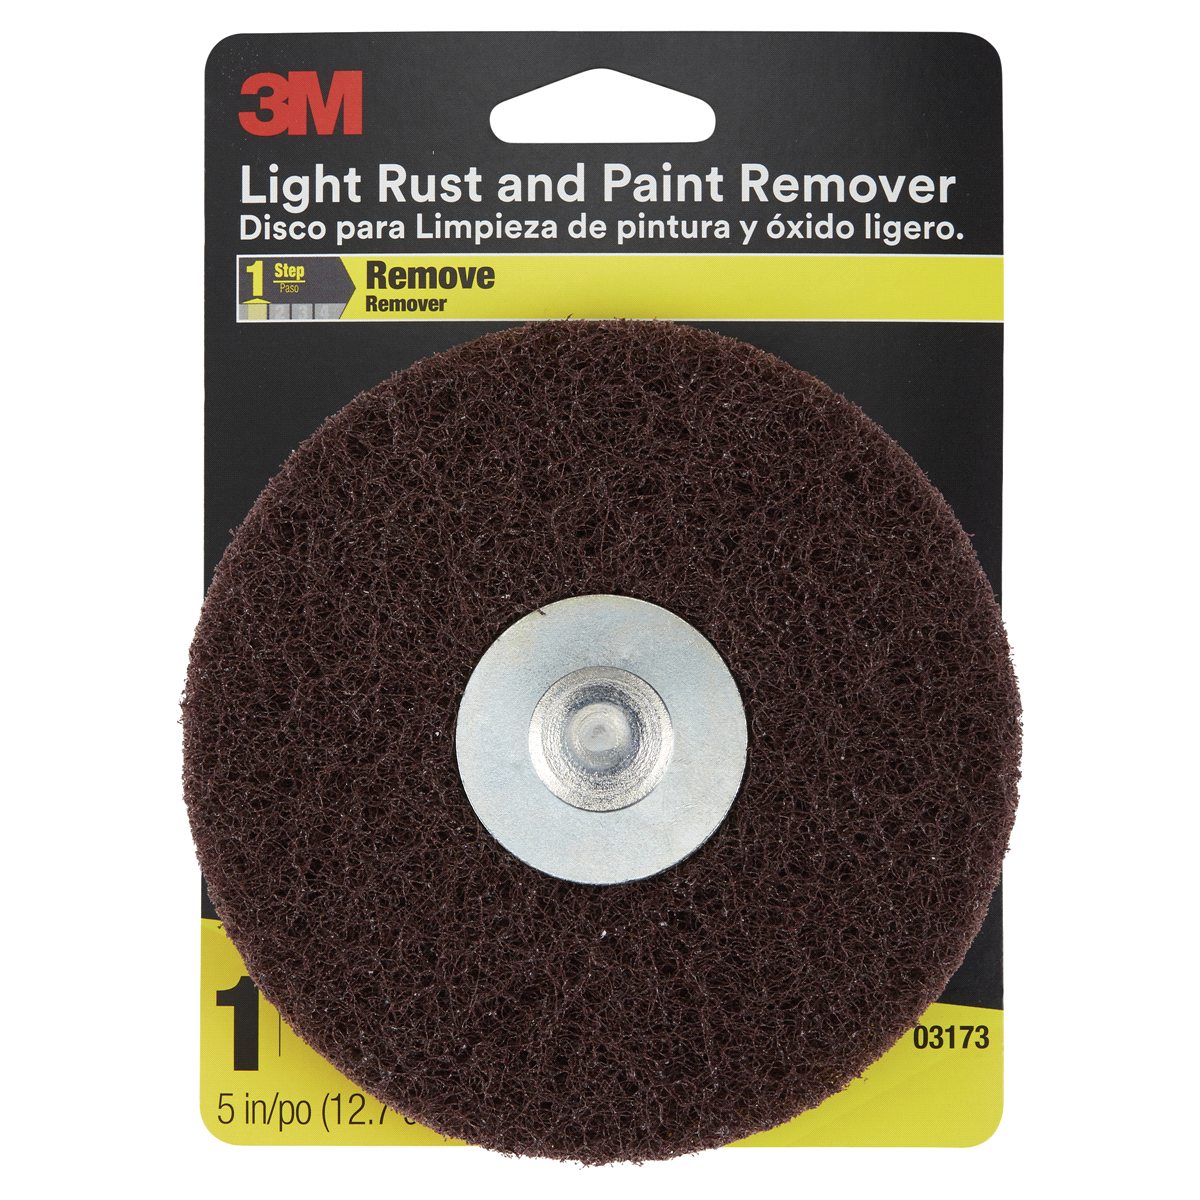 slide 1 of 1, 3M Light Rust and Paint Remover, 1 ct